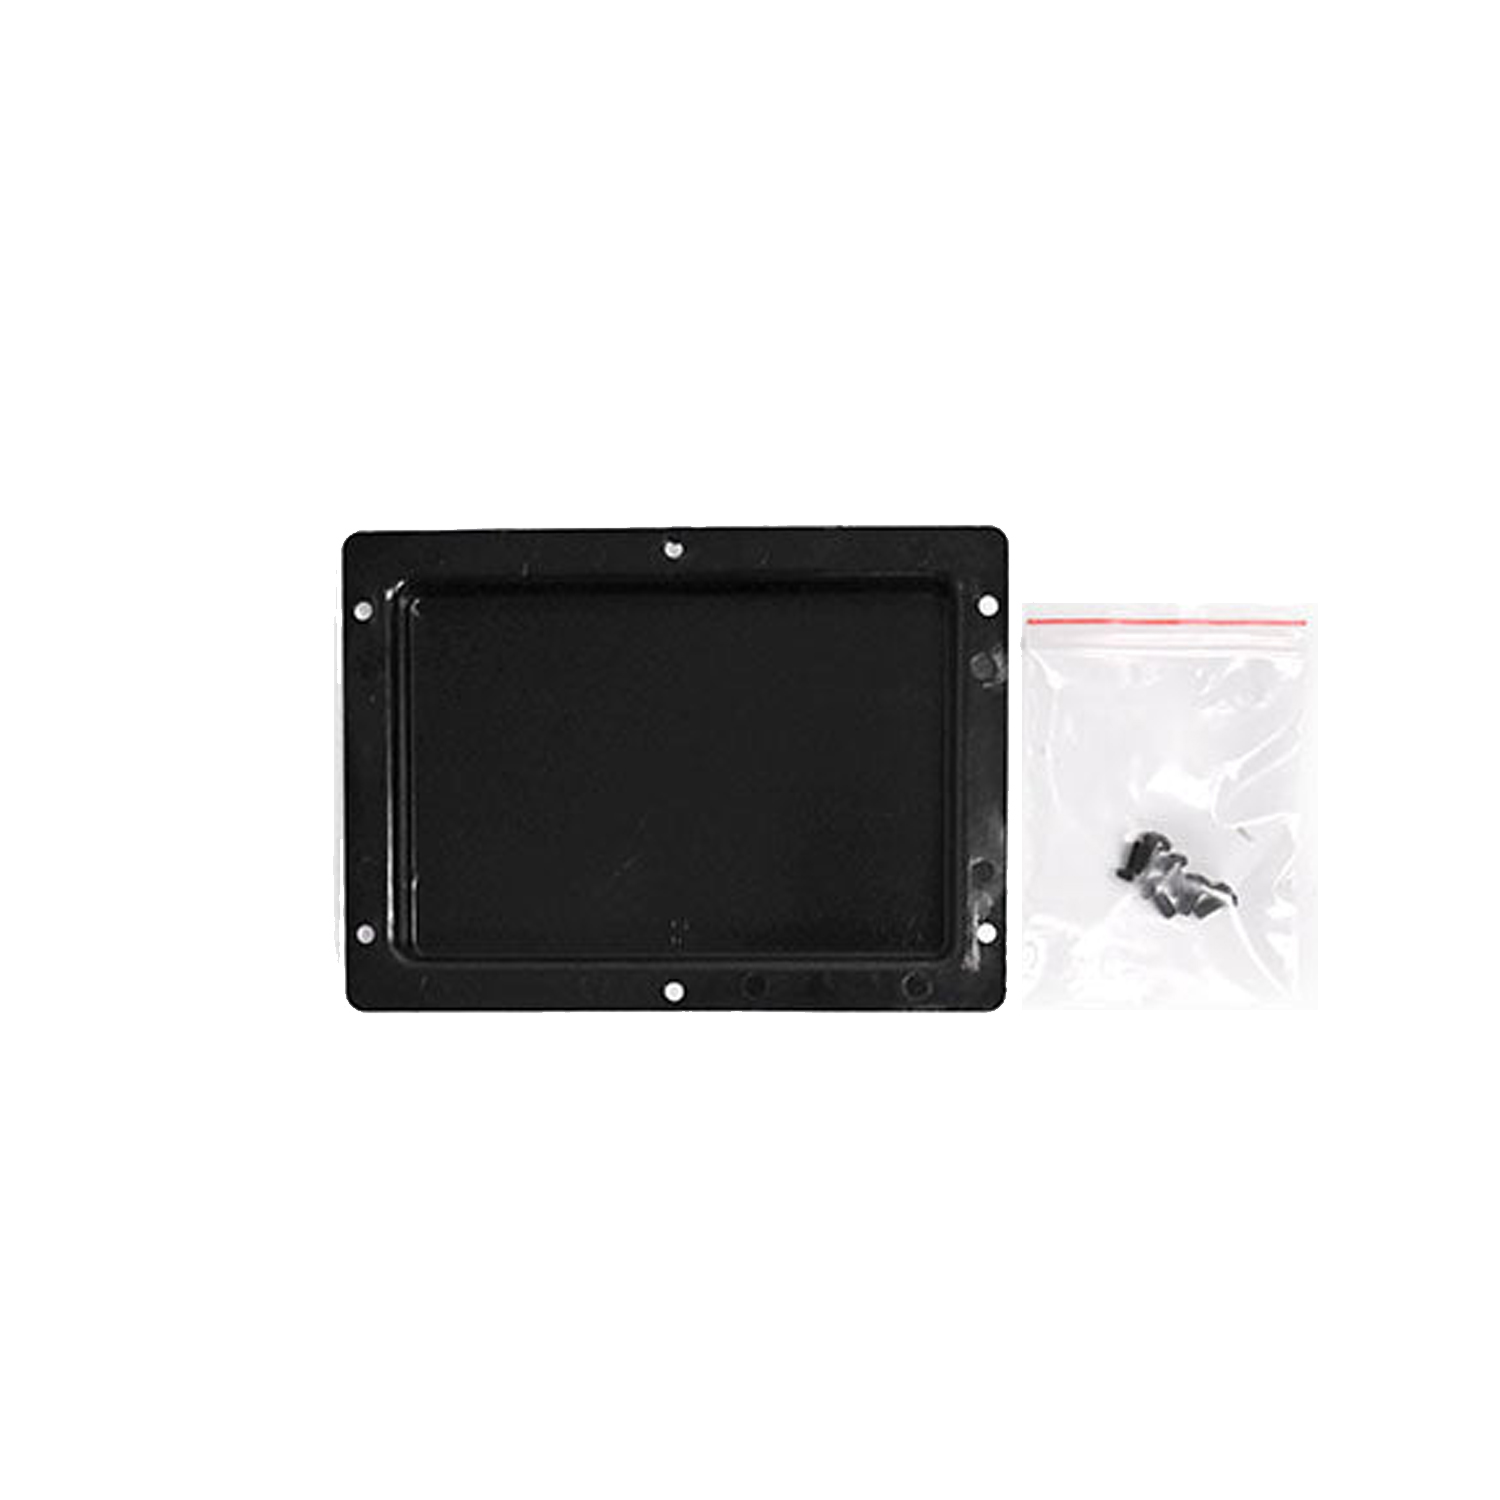 PCB Access Panel Kit for Masterbuilt Electric Smokers-YAOAWE